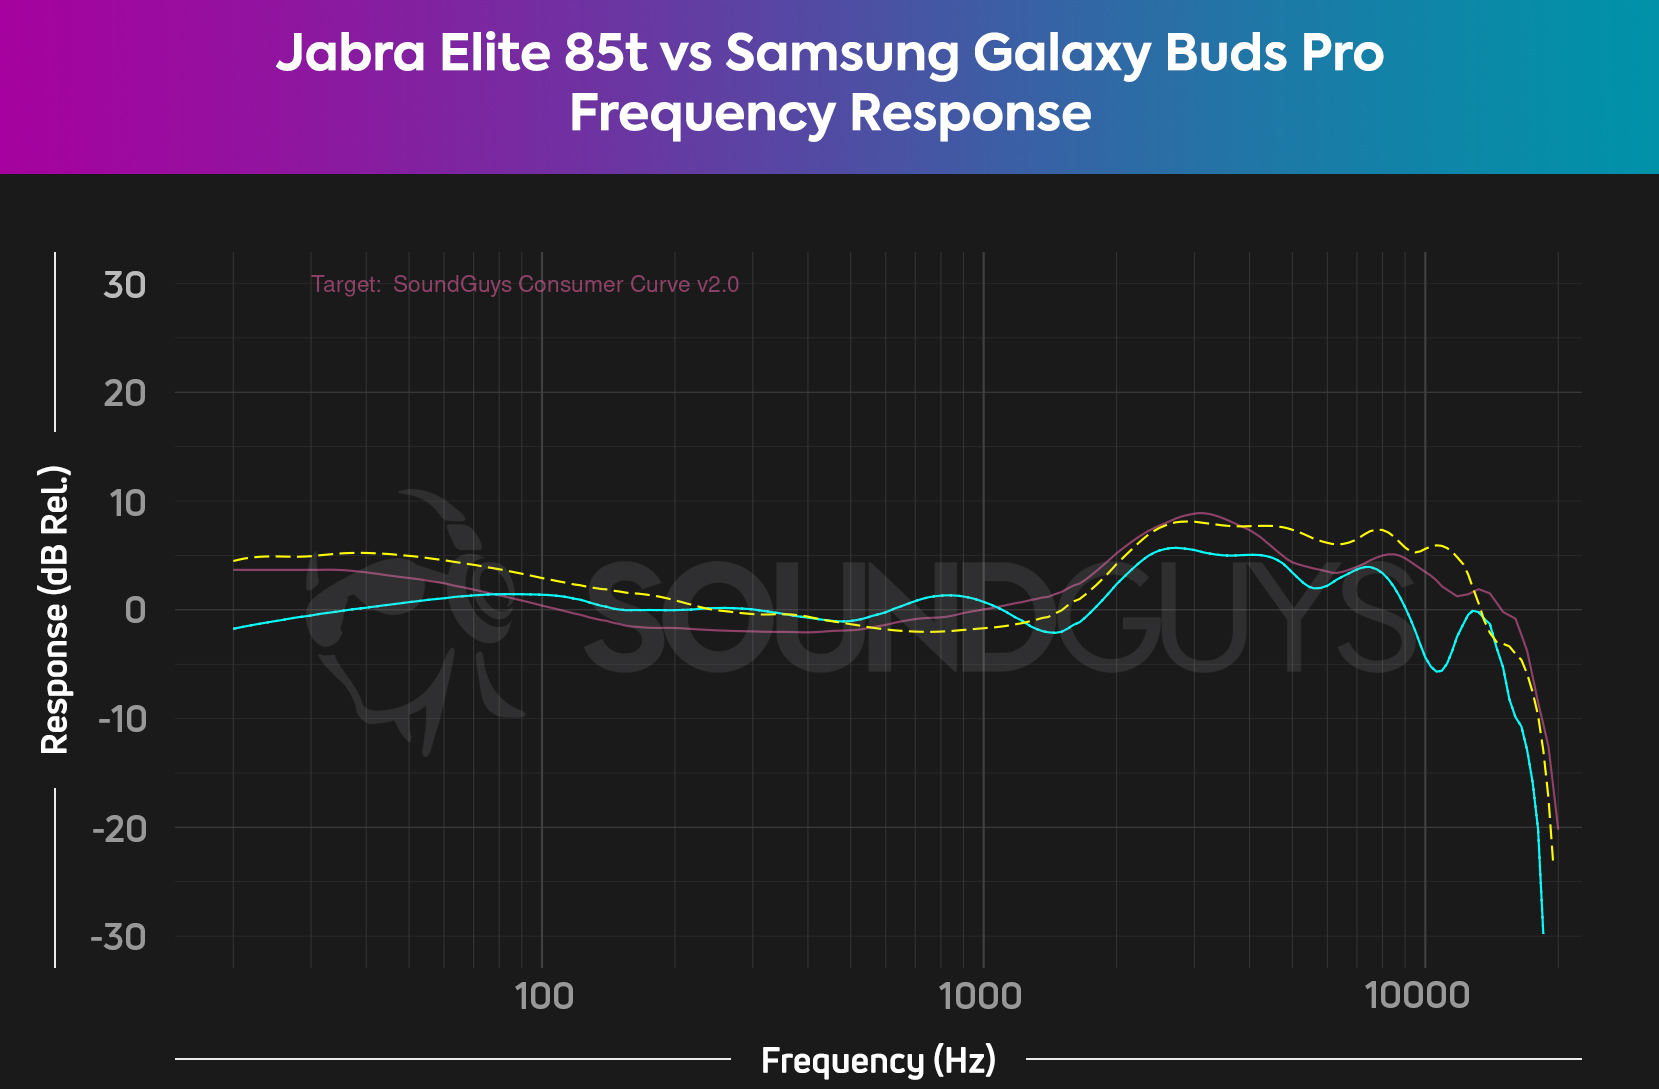 A frequency response chart compares the Jabra Elite 85t (cyan) to the Samsung Galaxy Buds Pro (yellow dash) noise canceling true wireless earbuds against the SoundGuys Consumer Curve V2.0, and the headsets sound fairly similar.